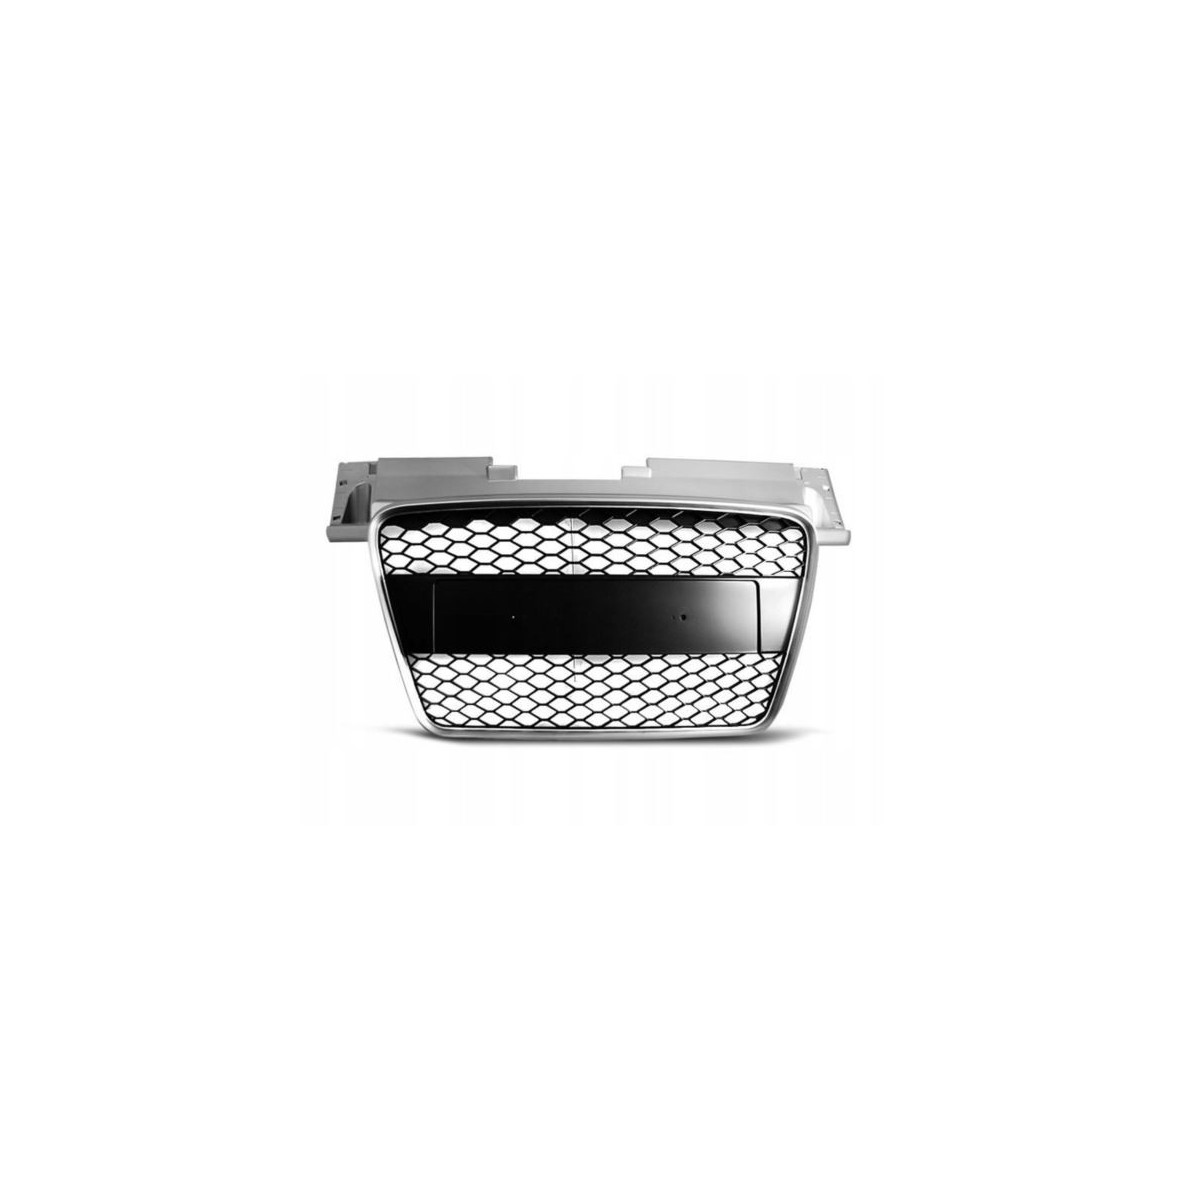 GRILL AUDI TT 06-09 SILVER RS-STYLE